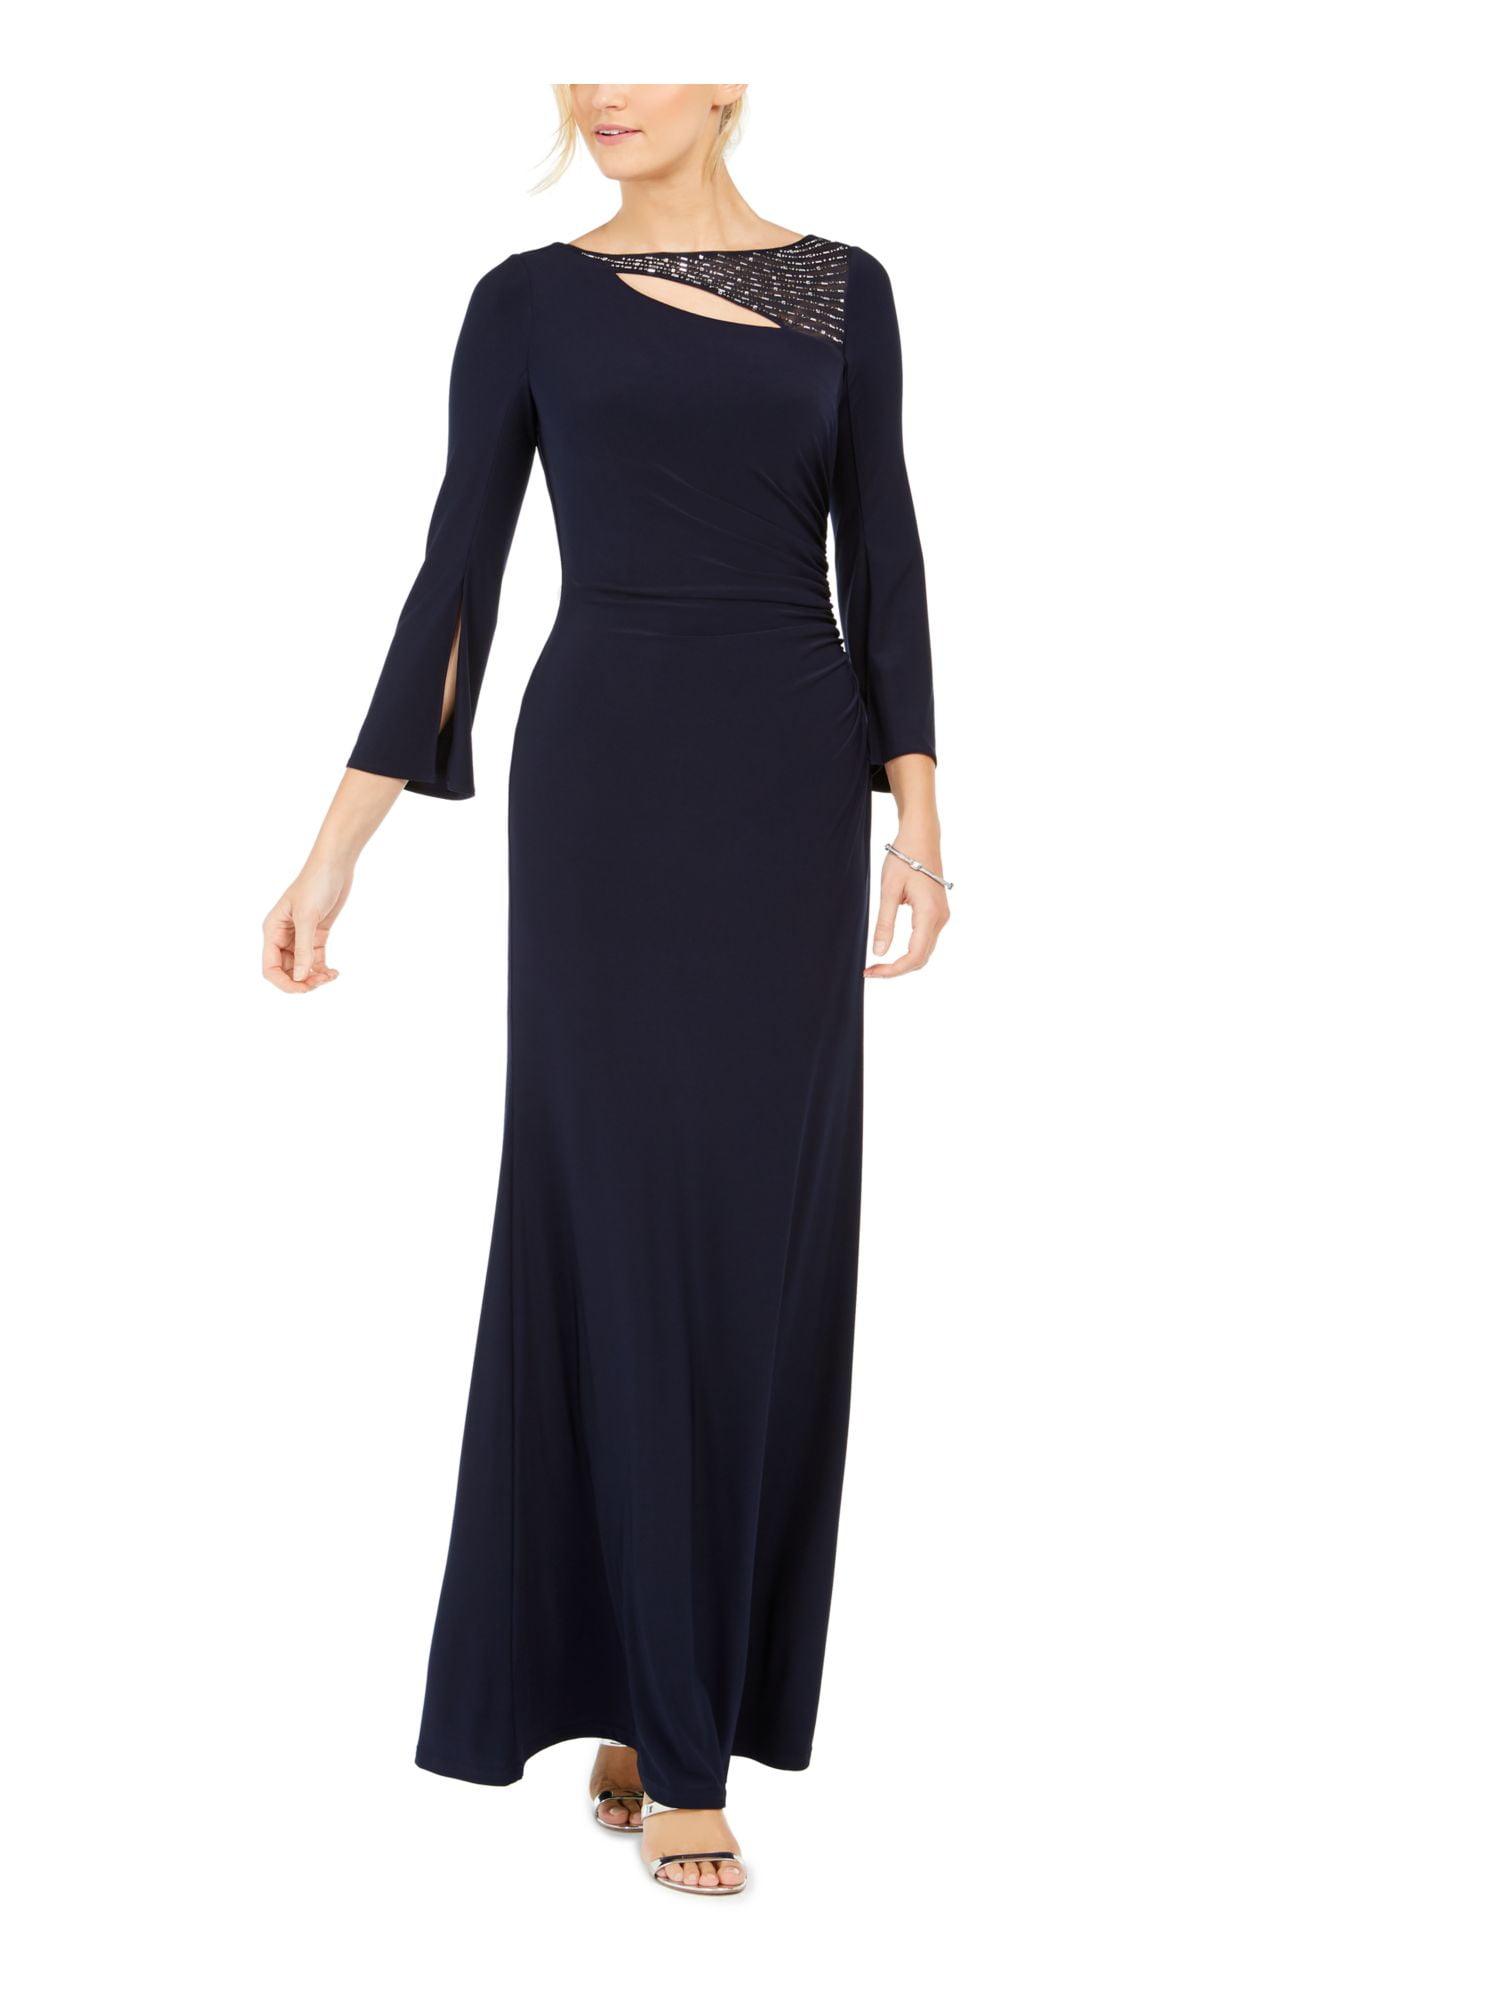 Women's Vince Camuto Formal Dresses & Evening Gowns